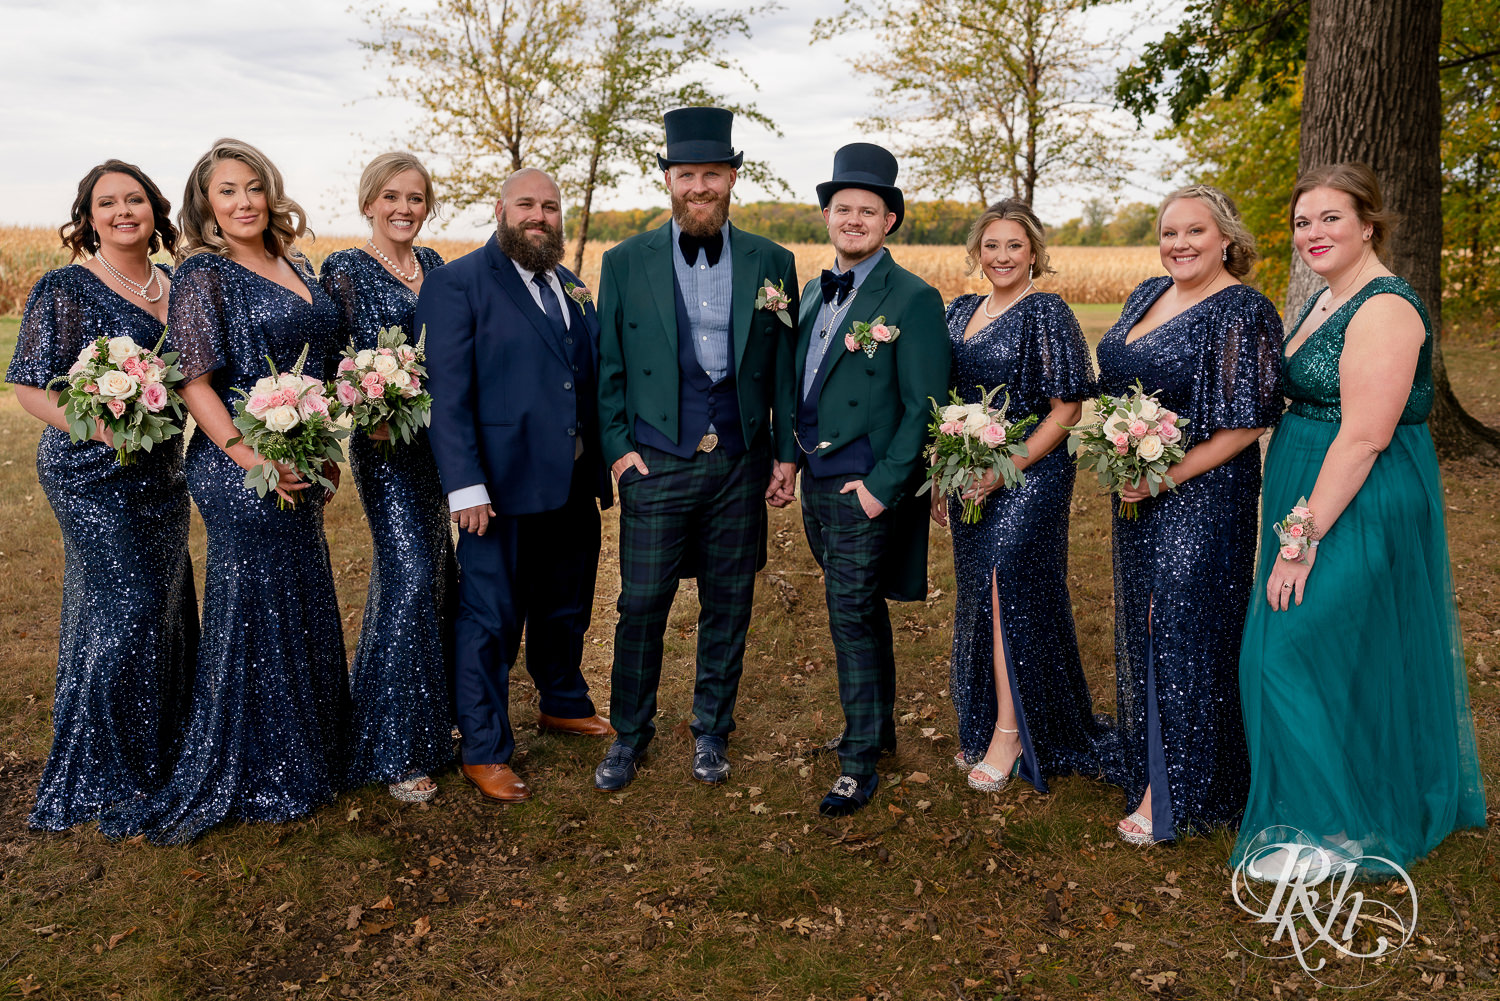 Gay wedding party with grooms wearing tophats and bridesmaids wearing sequin dresses.